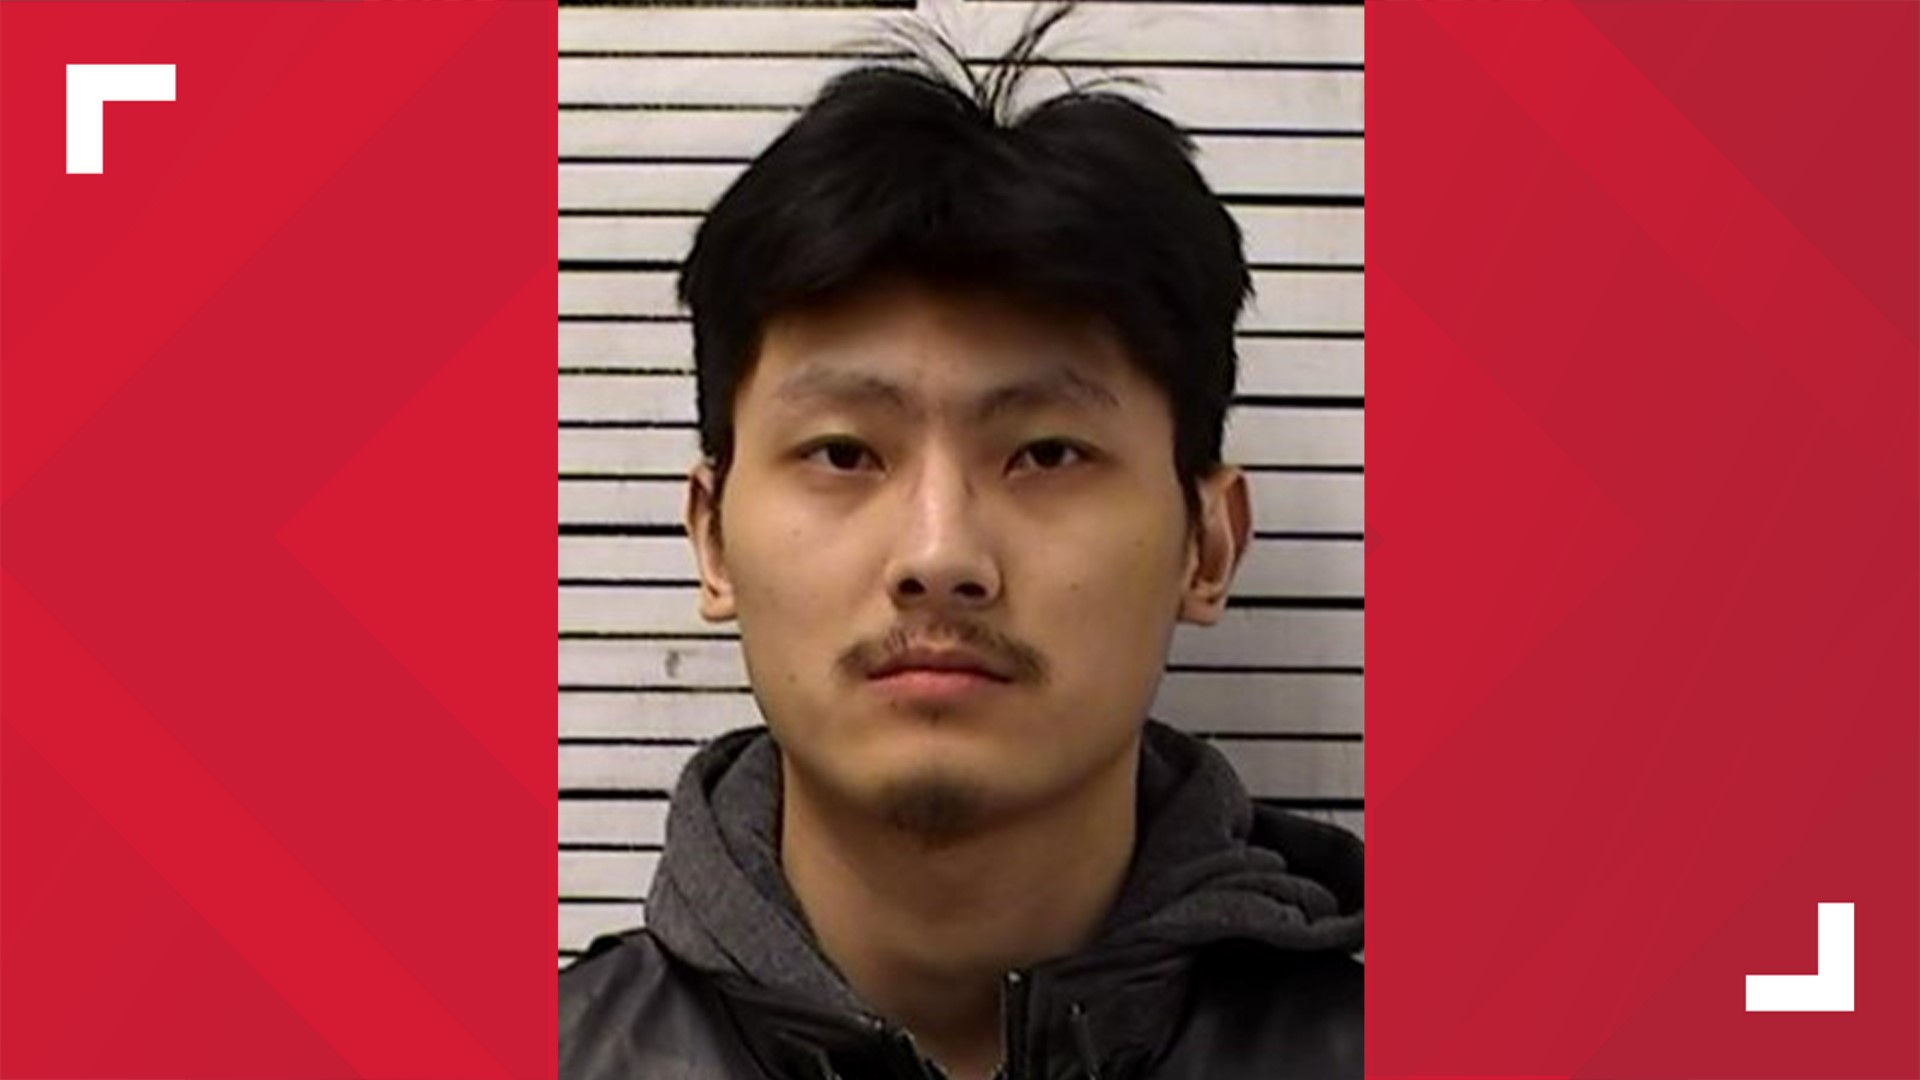 Siyuan Ye, 24, pleaded guilty in February to mail fraud and aggravated identity theft, according to U.S. Attorney Kenneth Parker’s office.